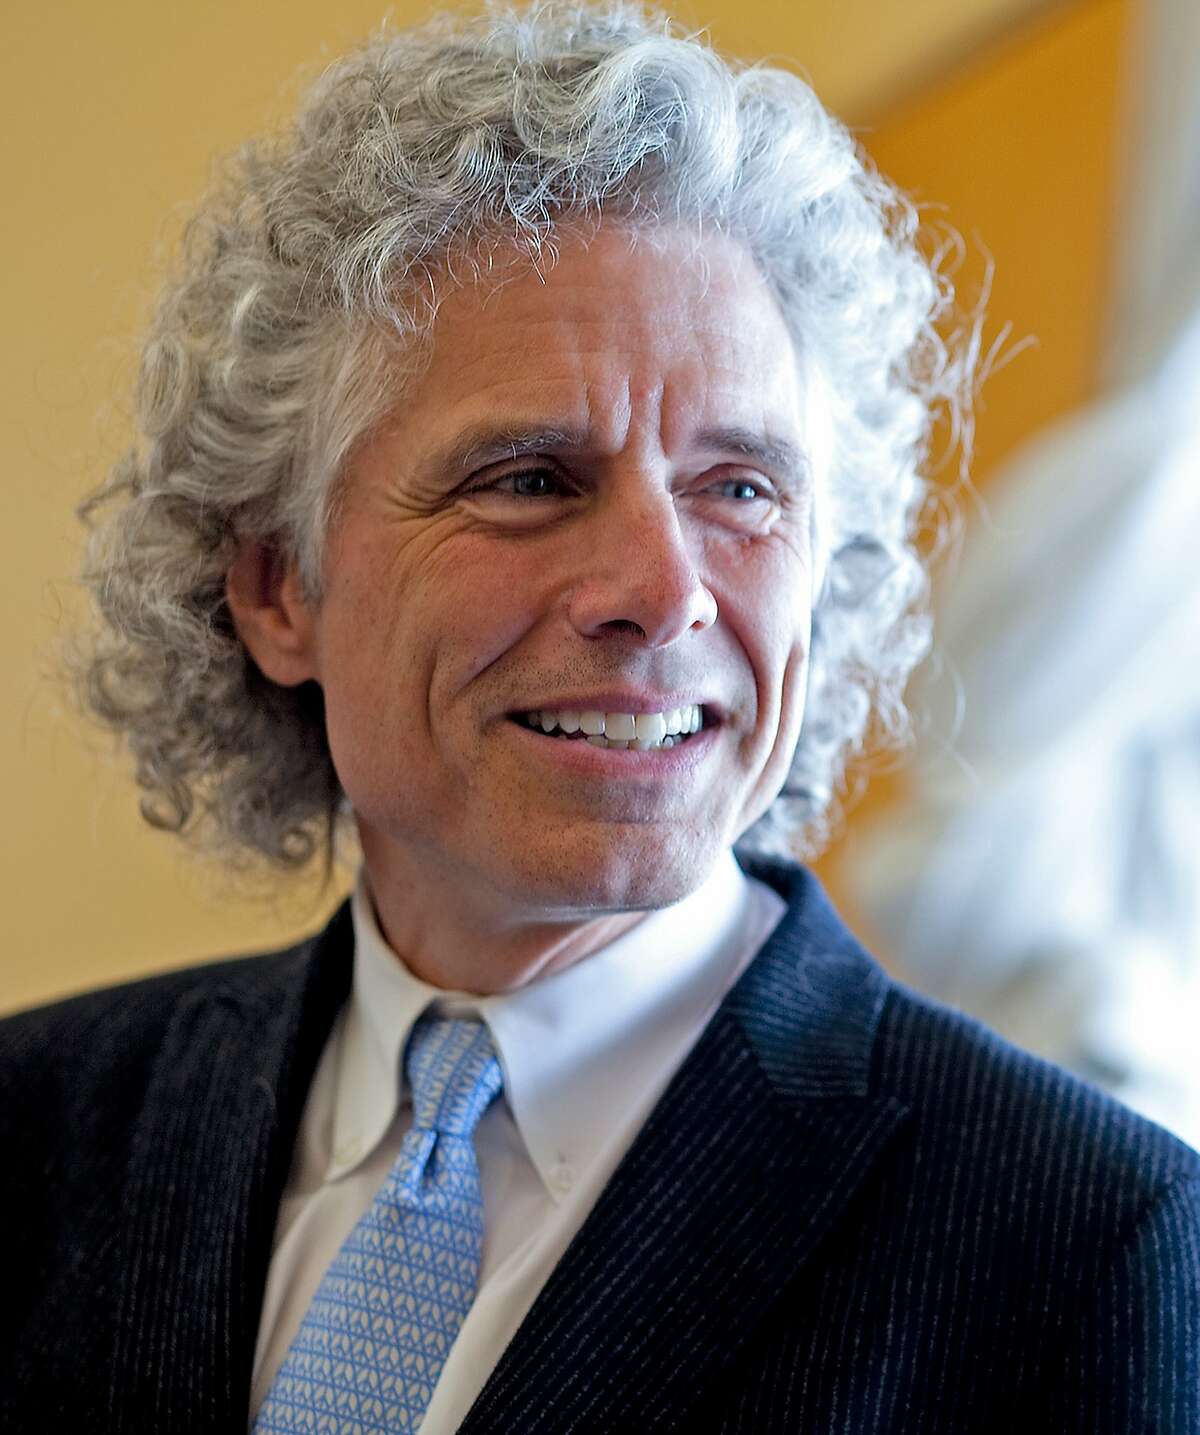 Steven Pinker, neuroscientist and bestselling author of "Enlightenment Now," will give the University at Albany's 175th Anniversary Keynote Presentation on Jan. 24.